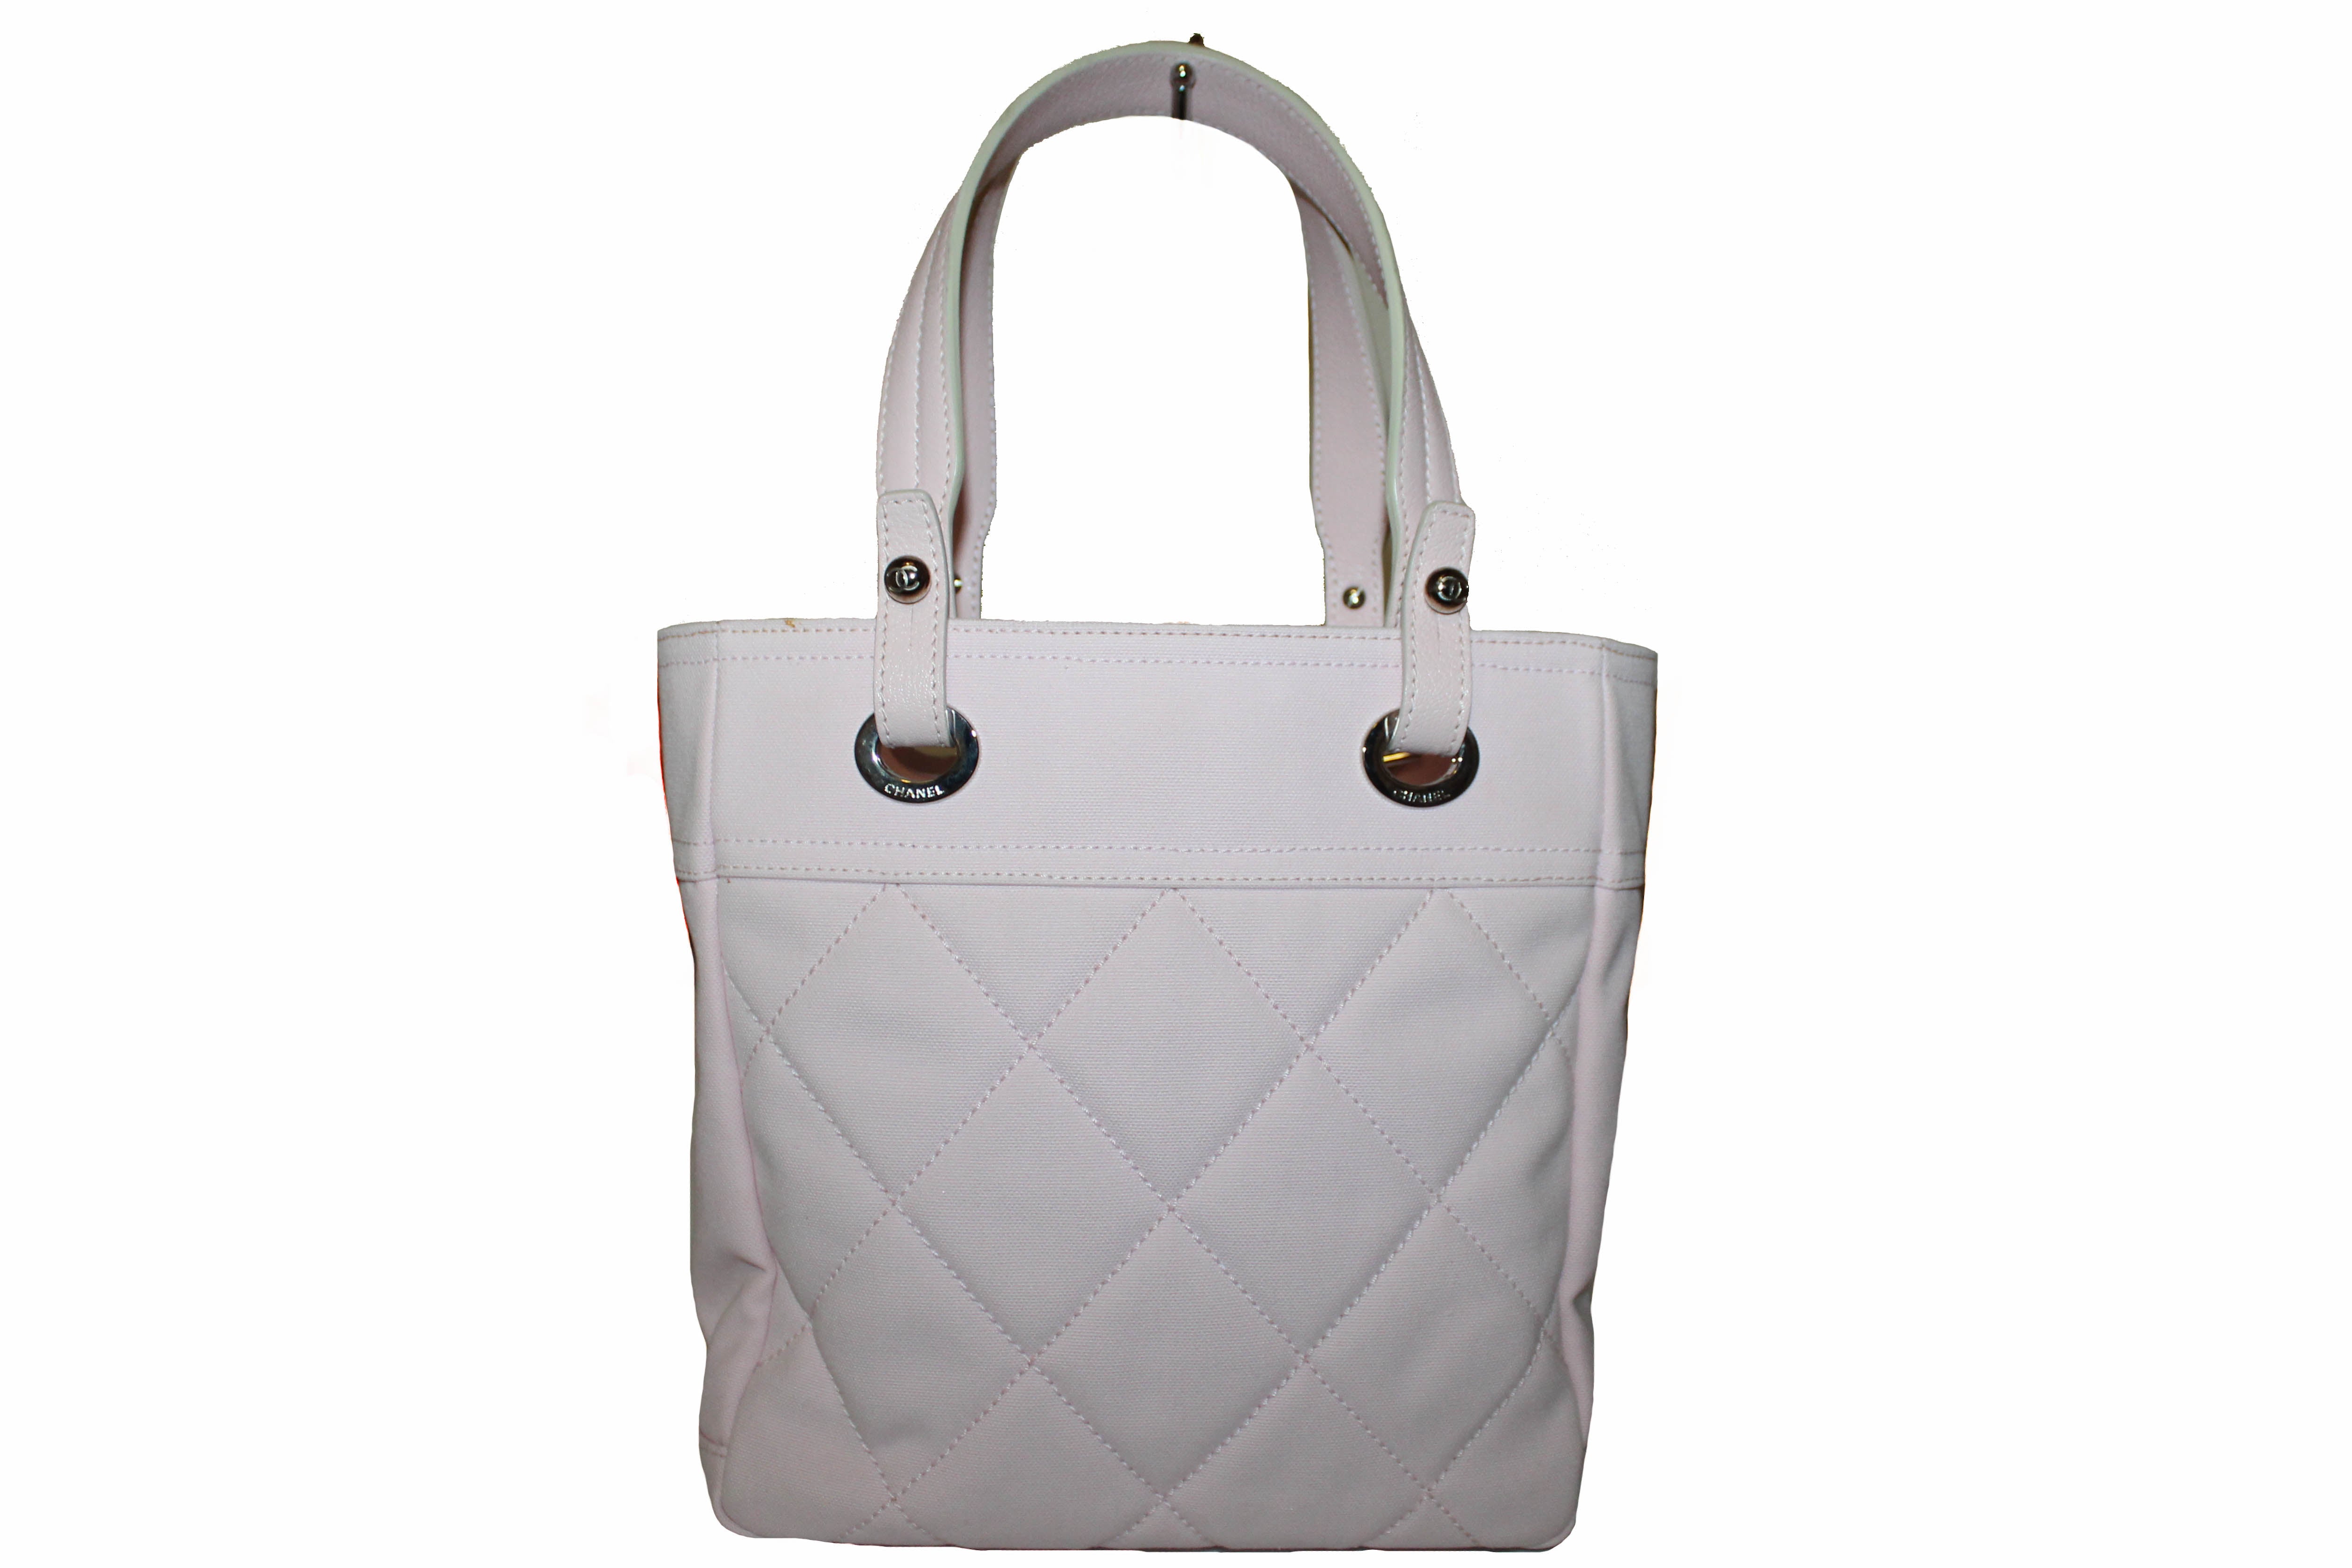 Chanel Biarritz Canvas Leather Tote